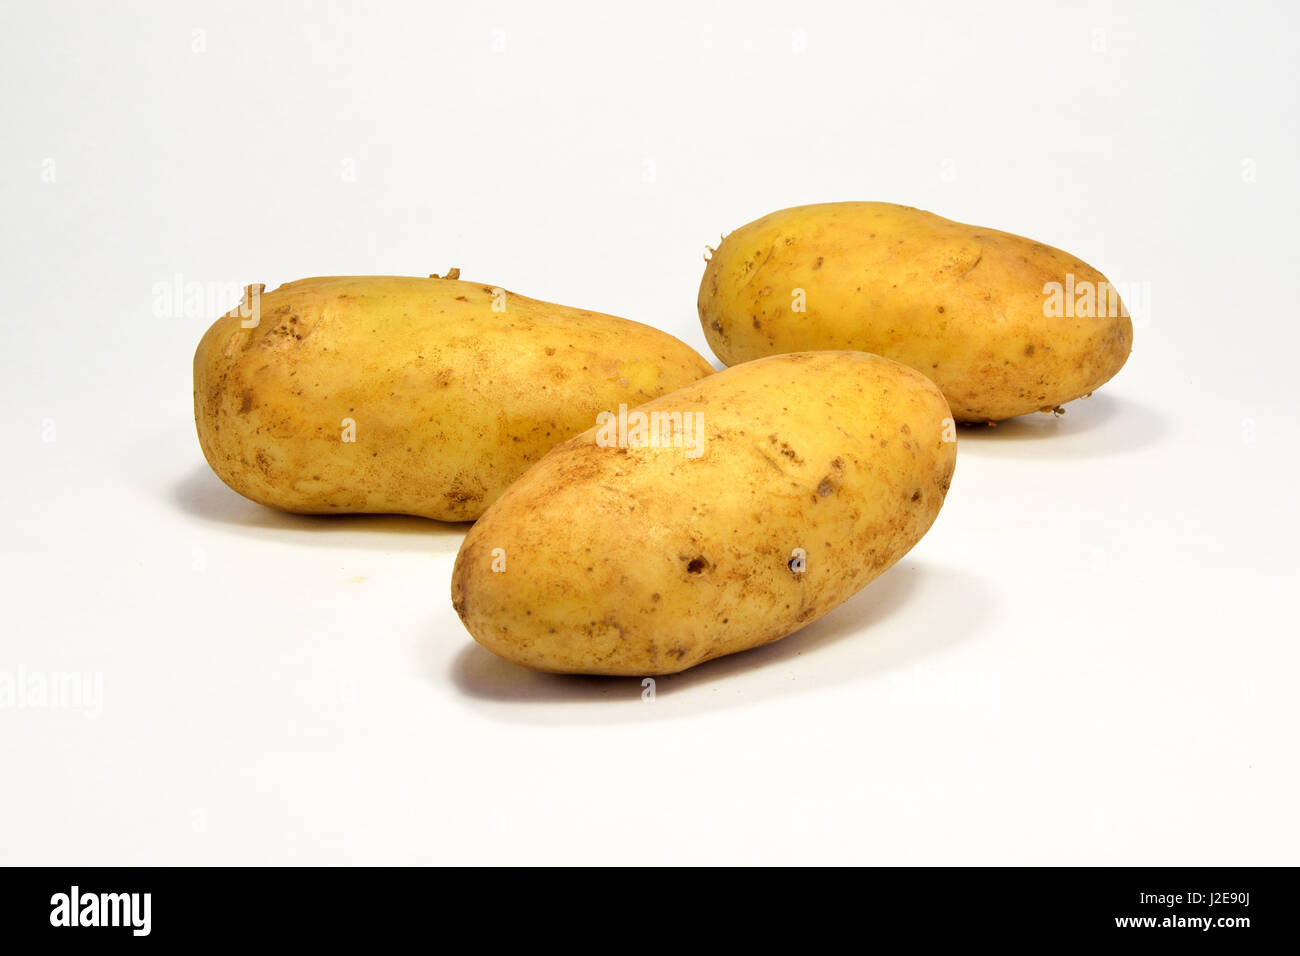 Fresh potatoes, healthy vegetarian source of carbohydrate Stock Photo